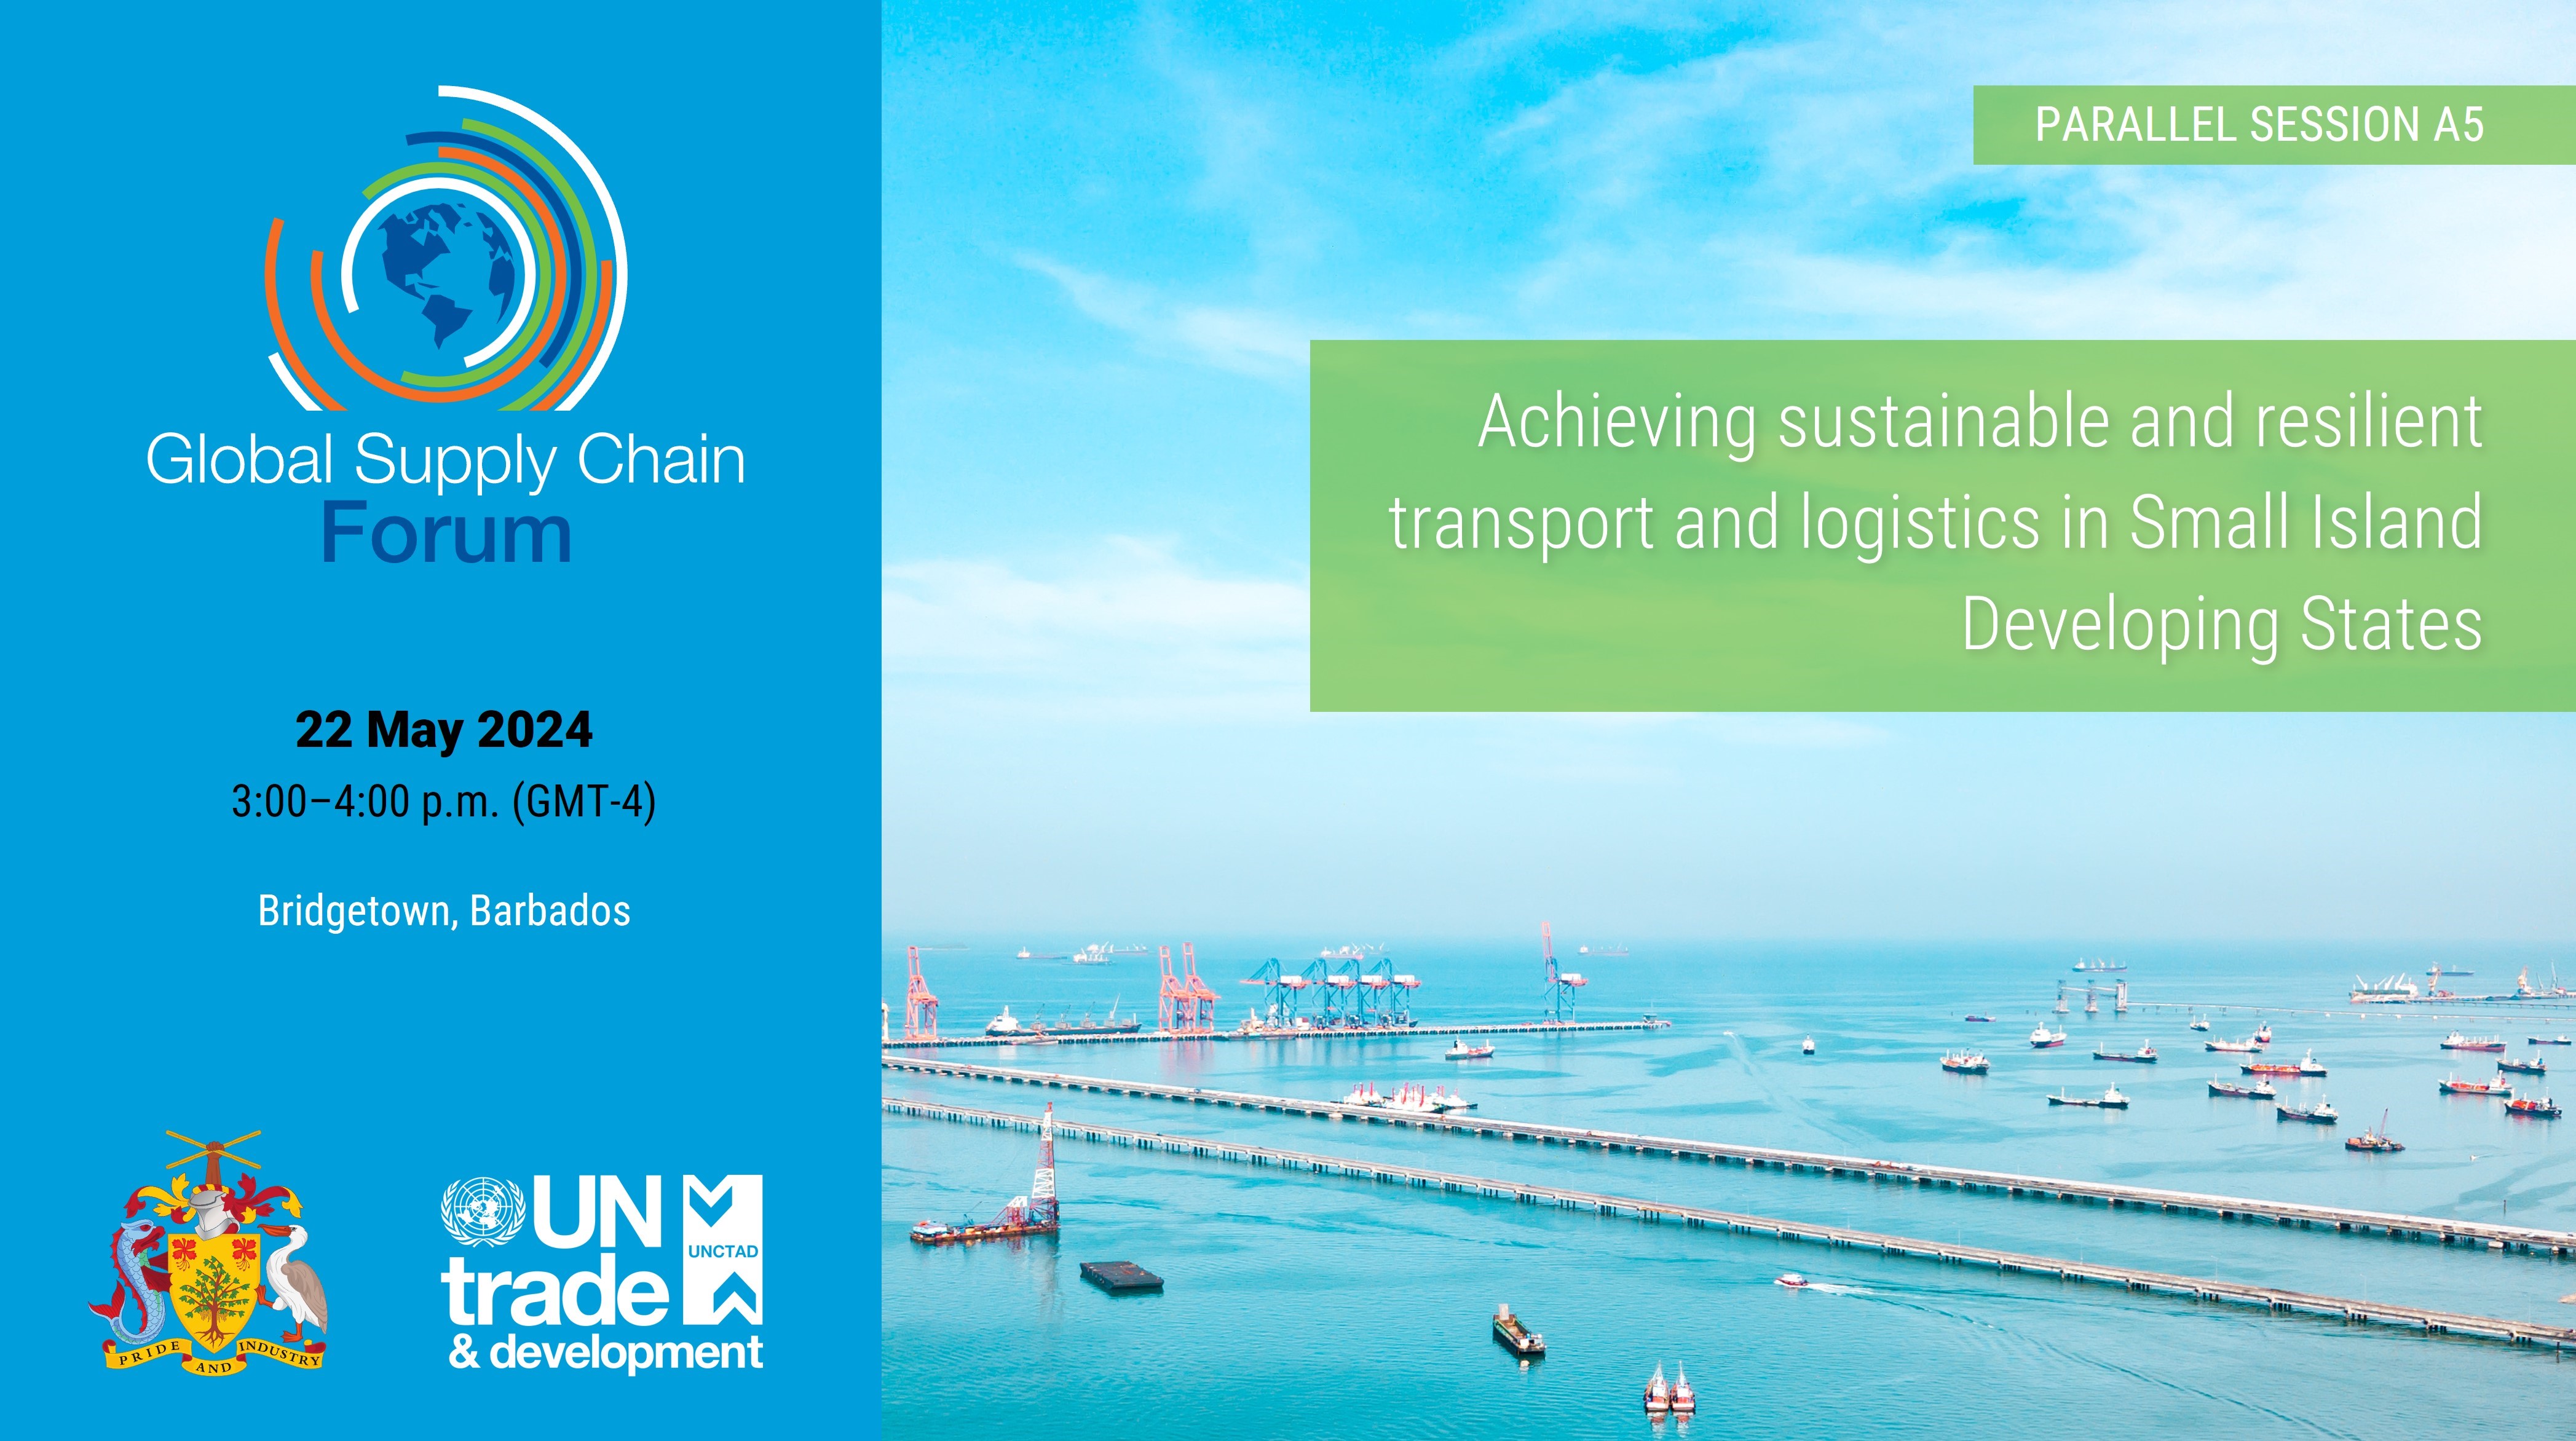 Achieving sustainable and resilient transport and logistics in Small Island Developing States